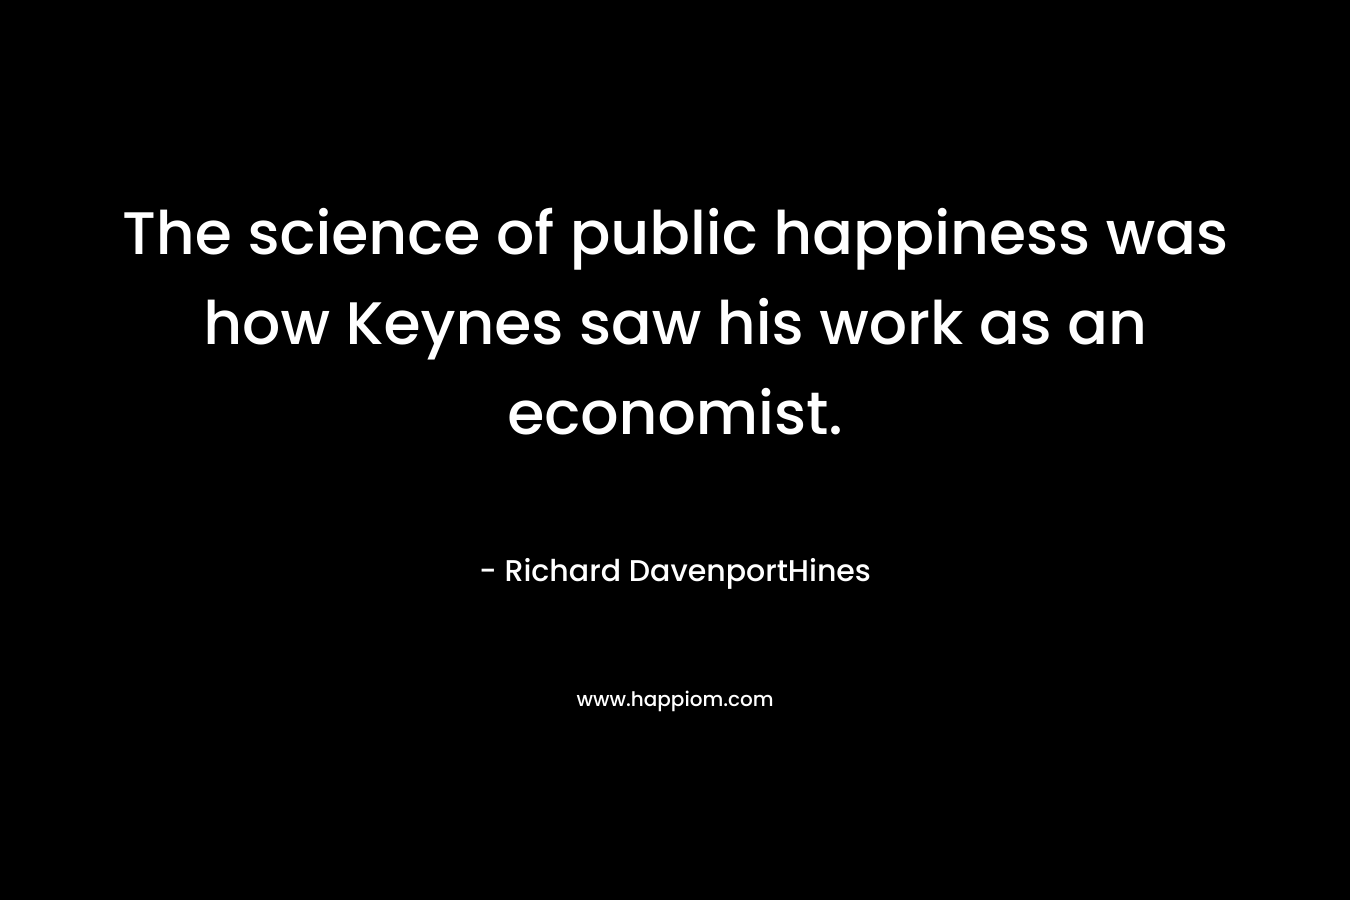 The science of public happiness was how Keynes saw his work as an economist. – Richard DavenportHines